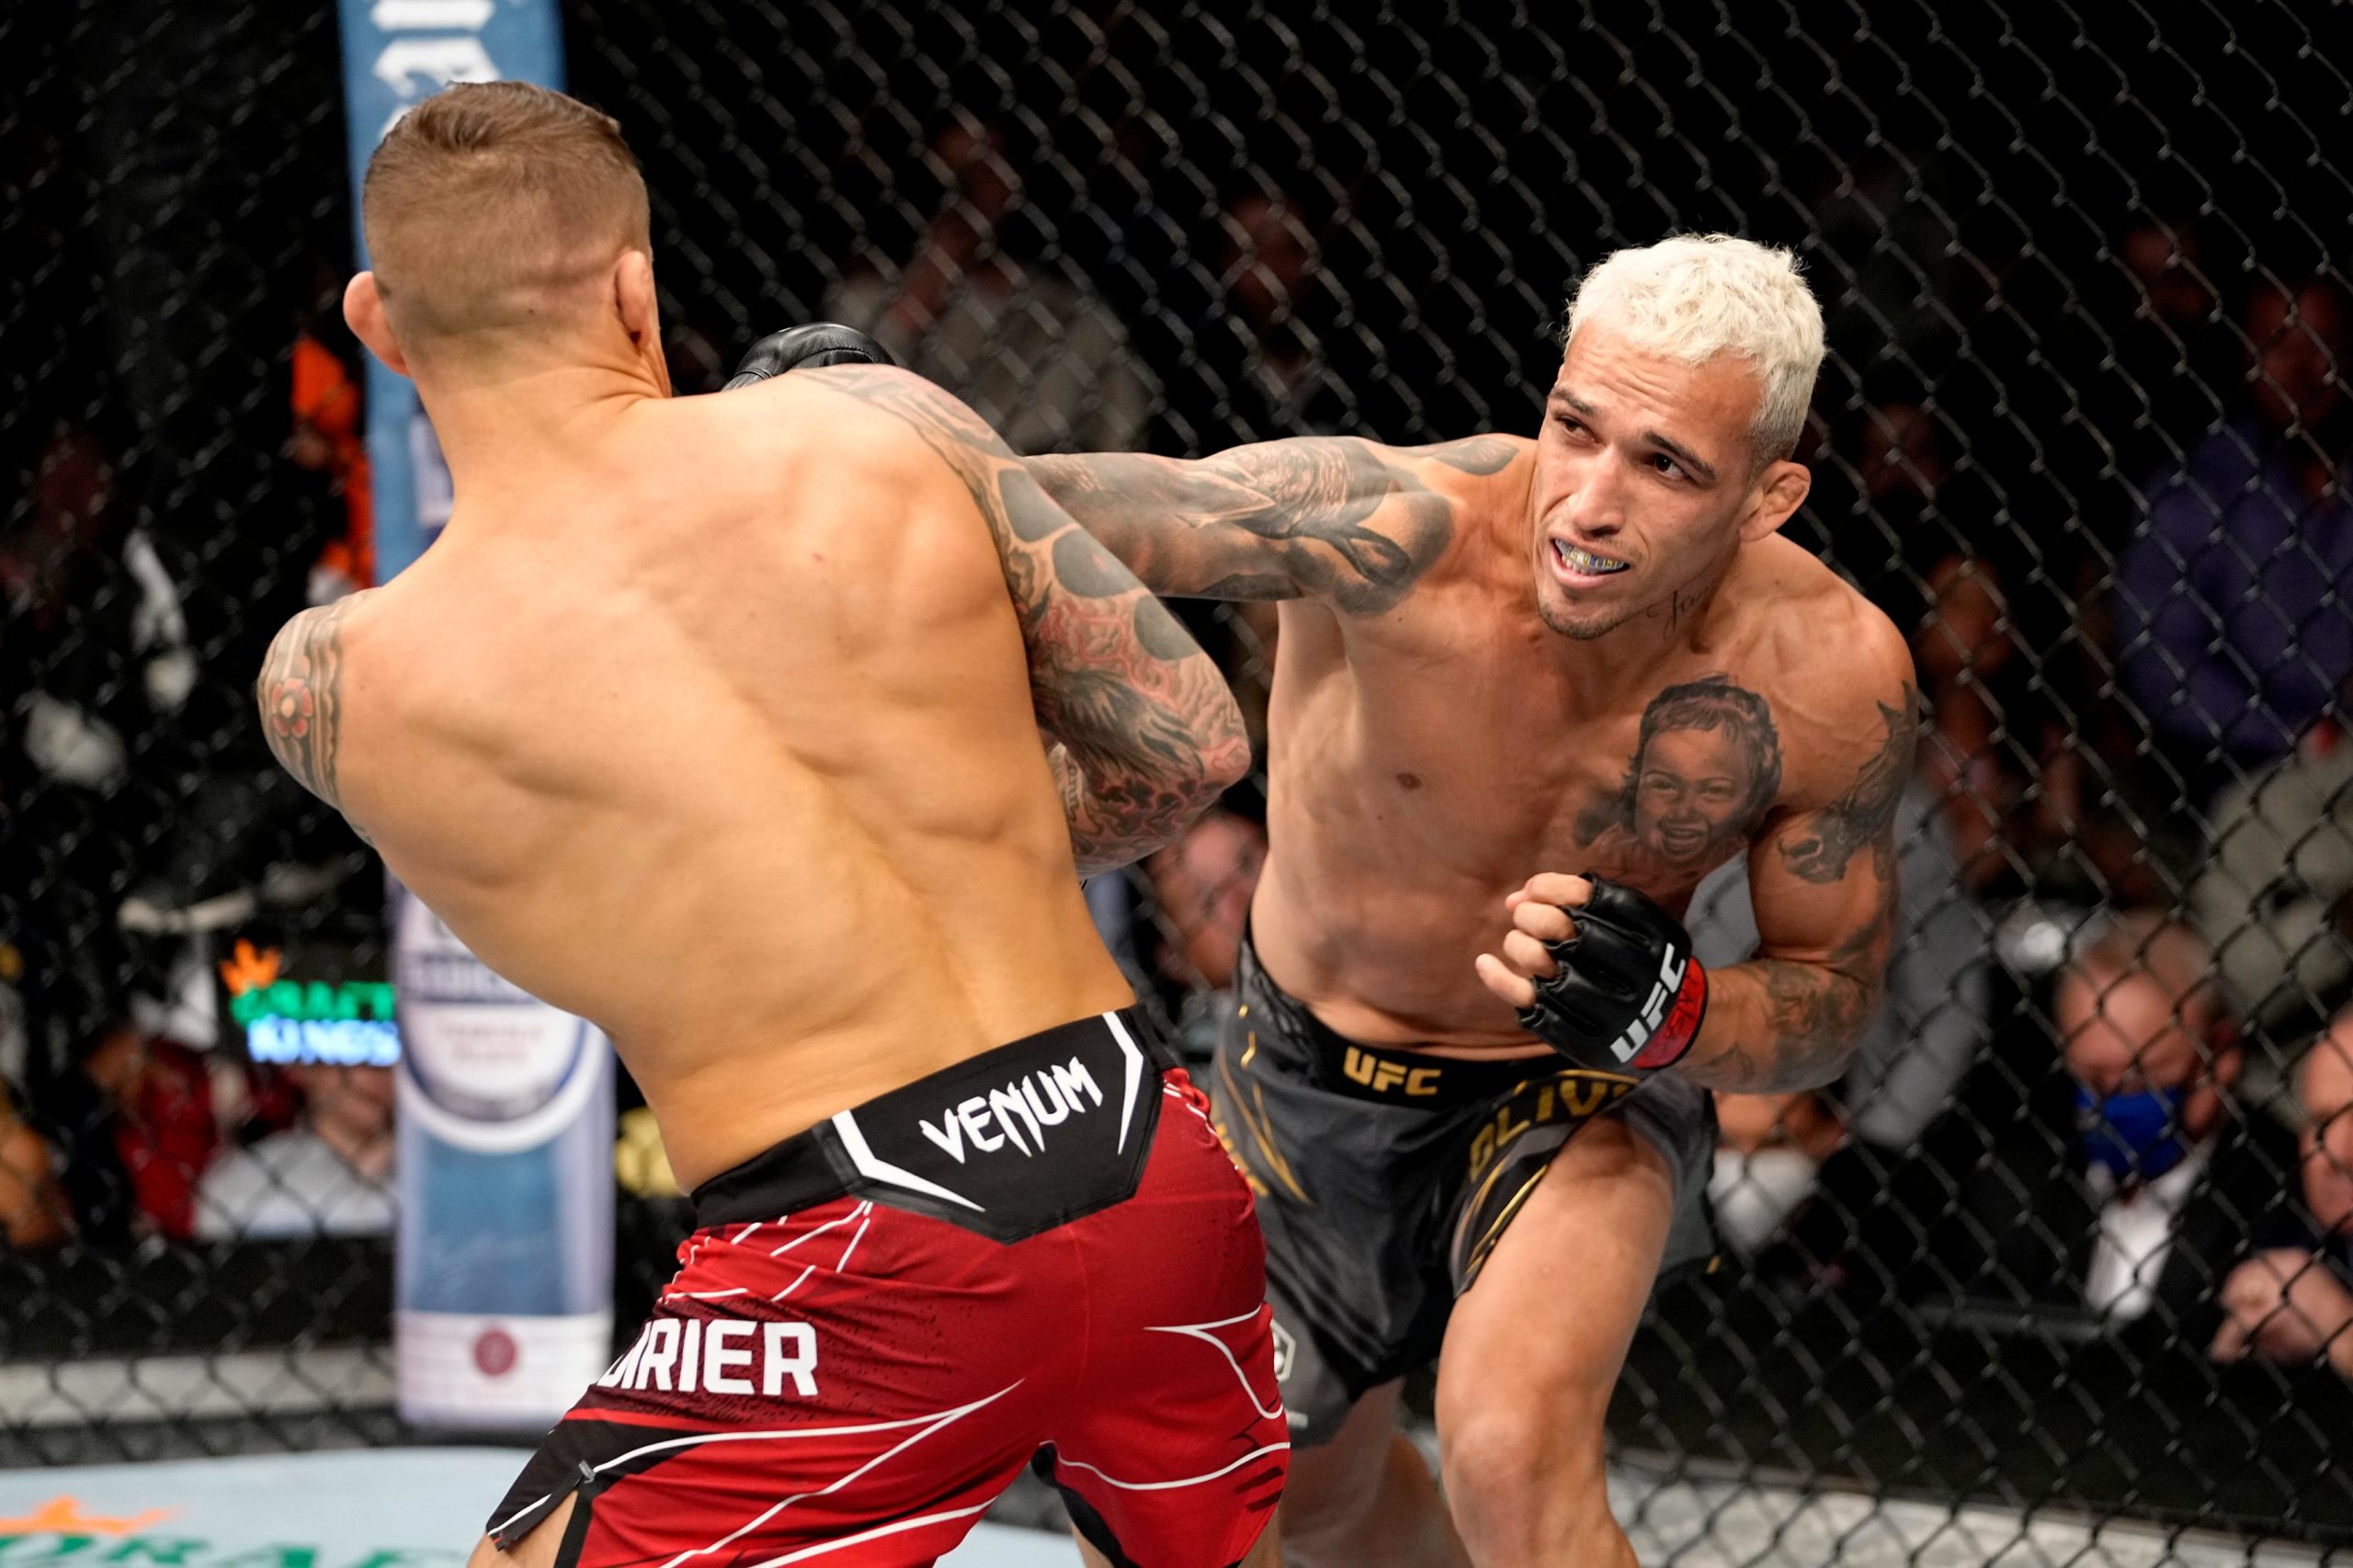 Oliveira beat Poirier: Champion Charles Oliviera retains crown after Dustin Poirier submission in UFC 269, continues winning streak